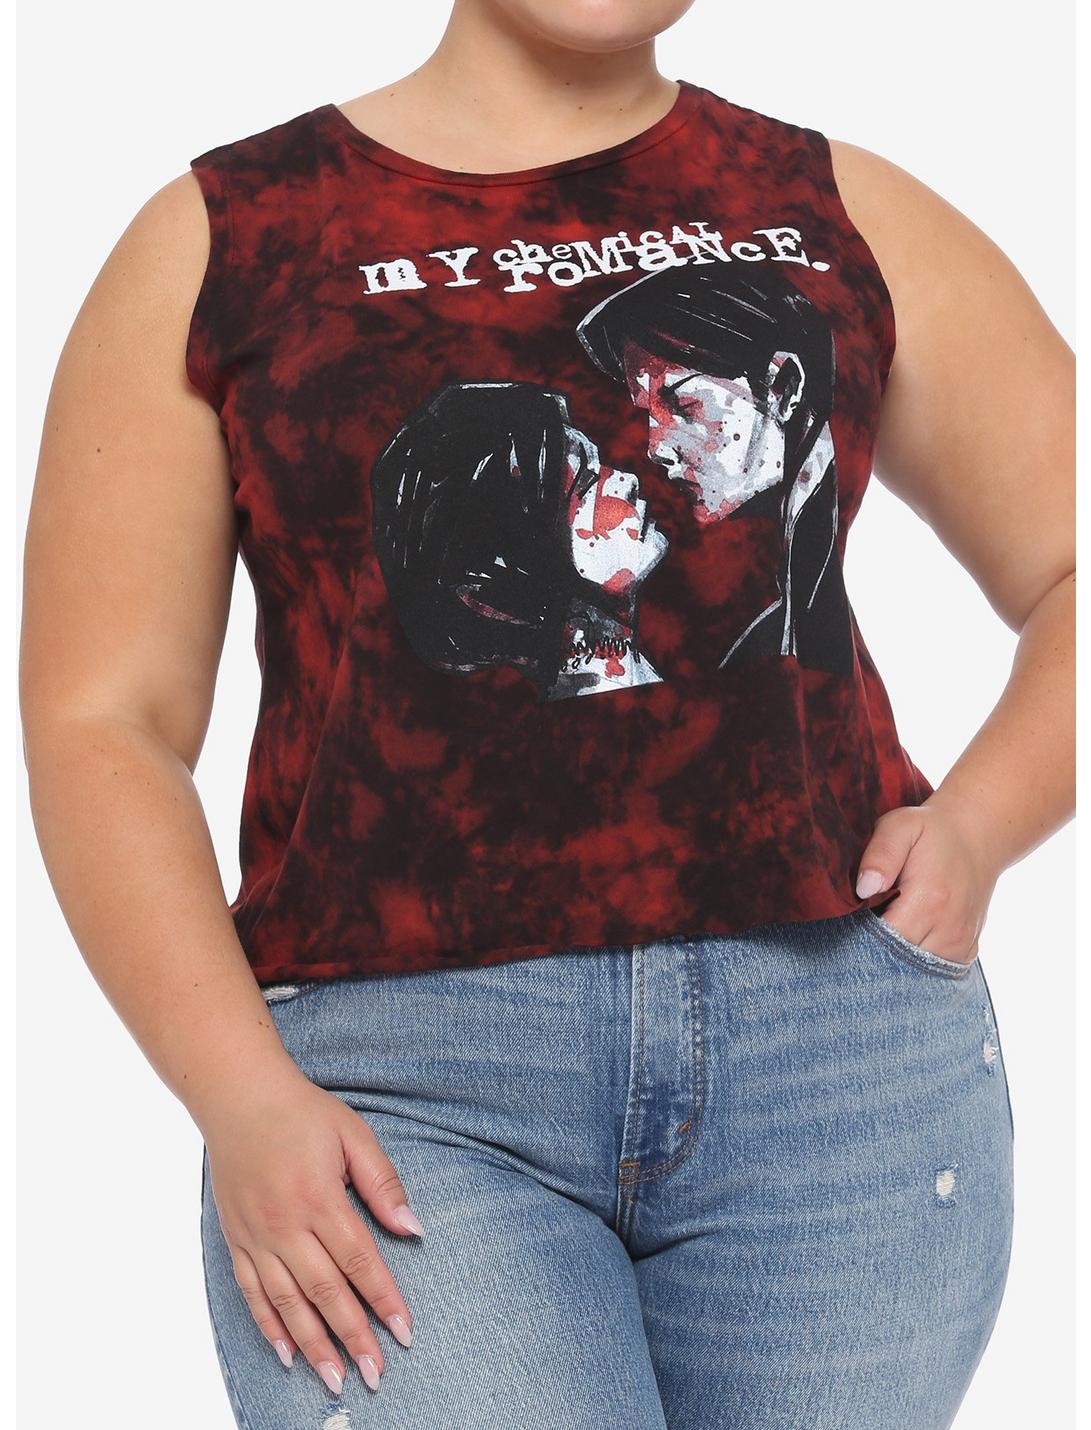 My Chemical Romance Three Cheers For Sweet Revenge Tie-Dye Girls Crop Muscle Top Plus Size, MULTI, hi-res